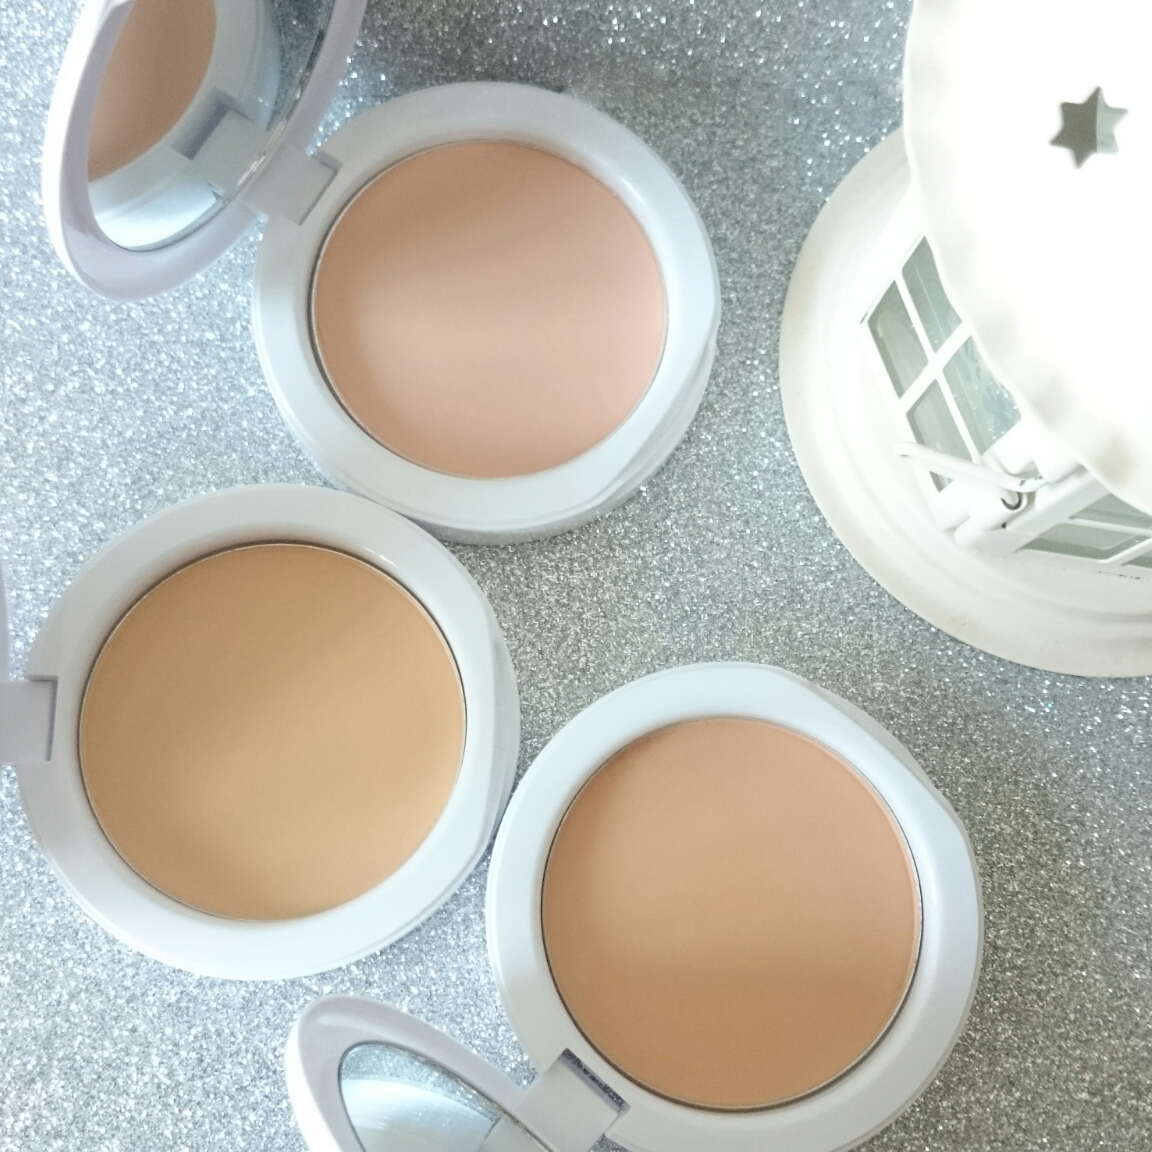 Maybelline White Super Fresh Compact Powder review and swatches